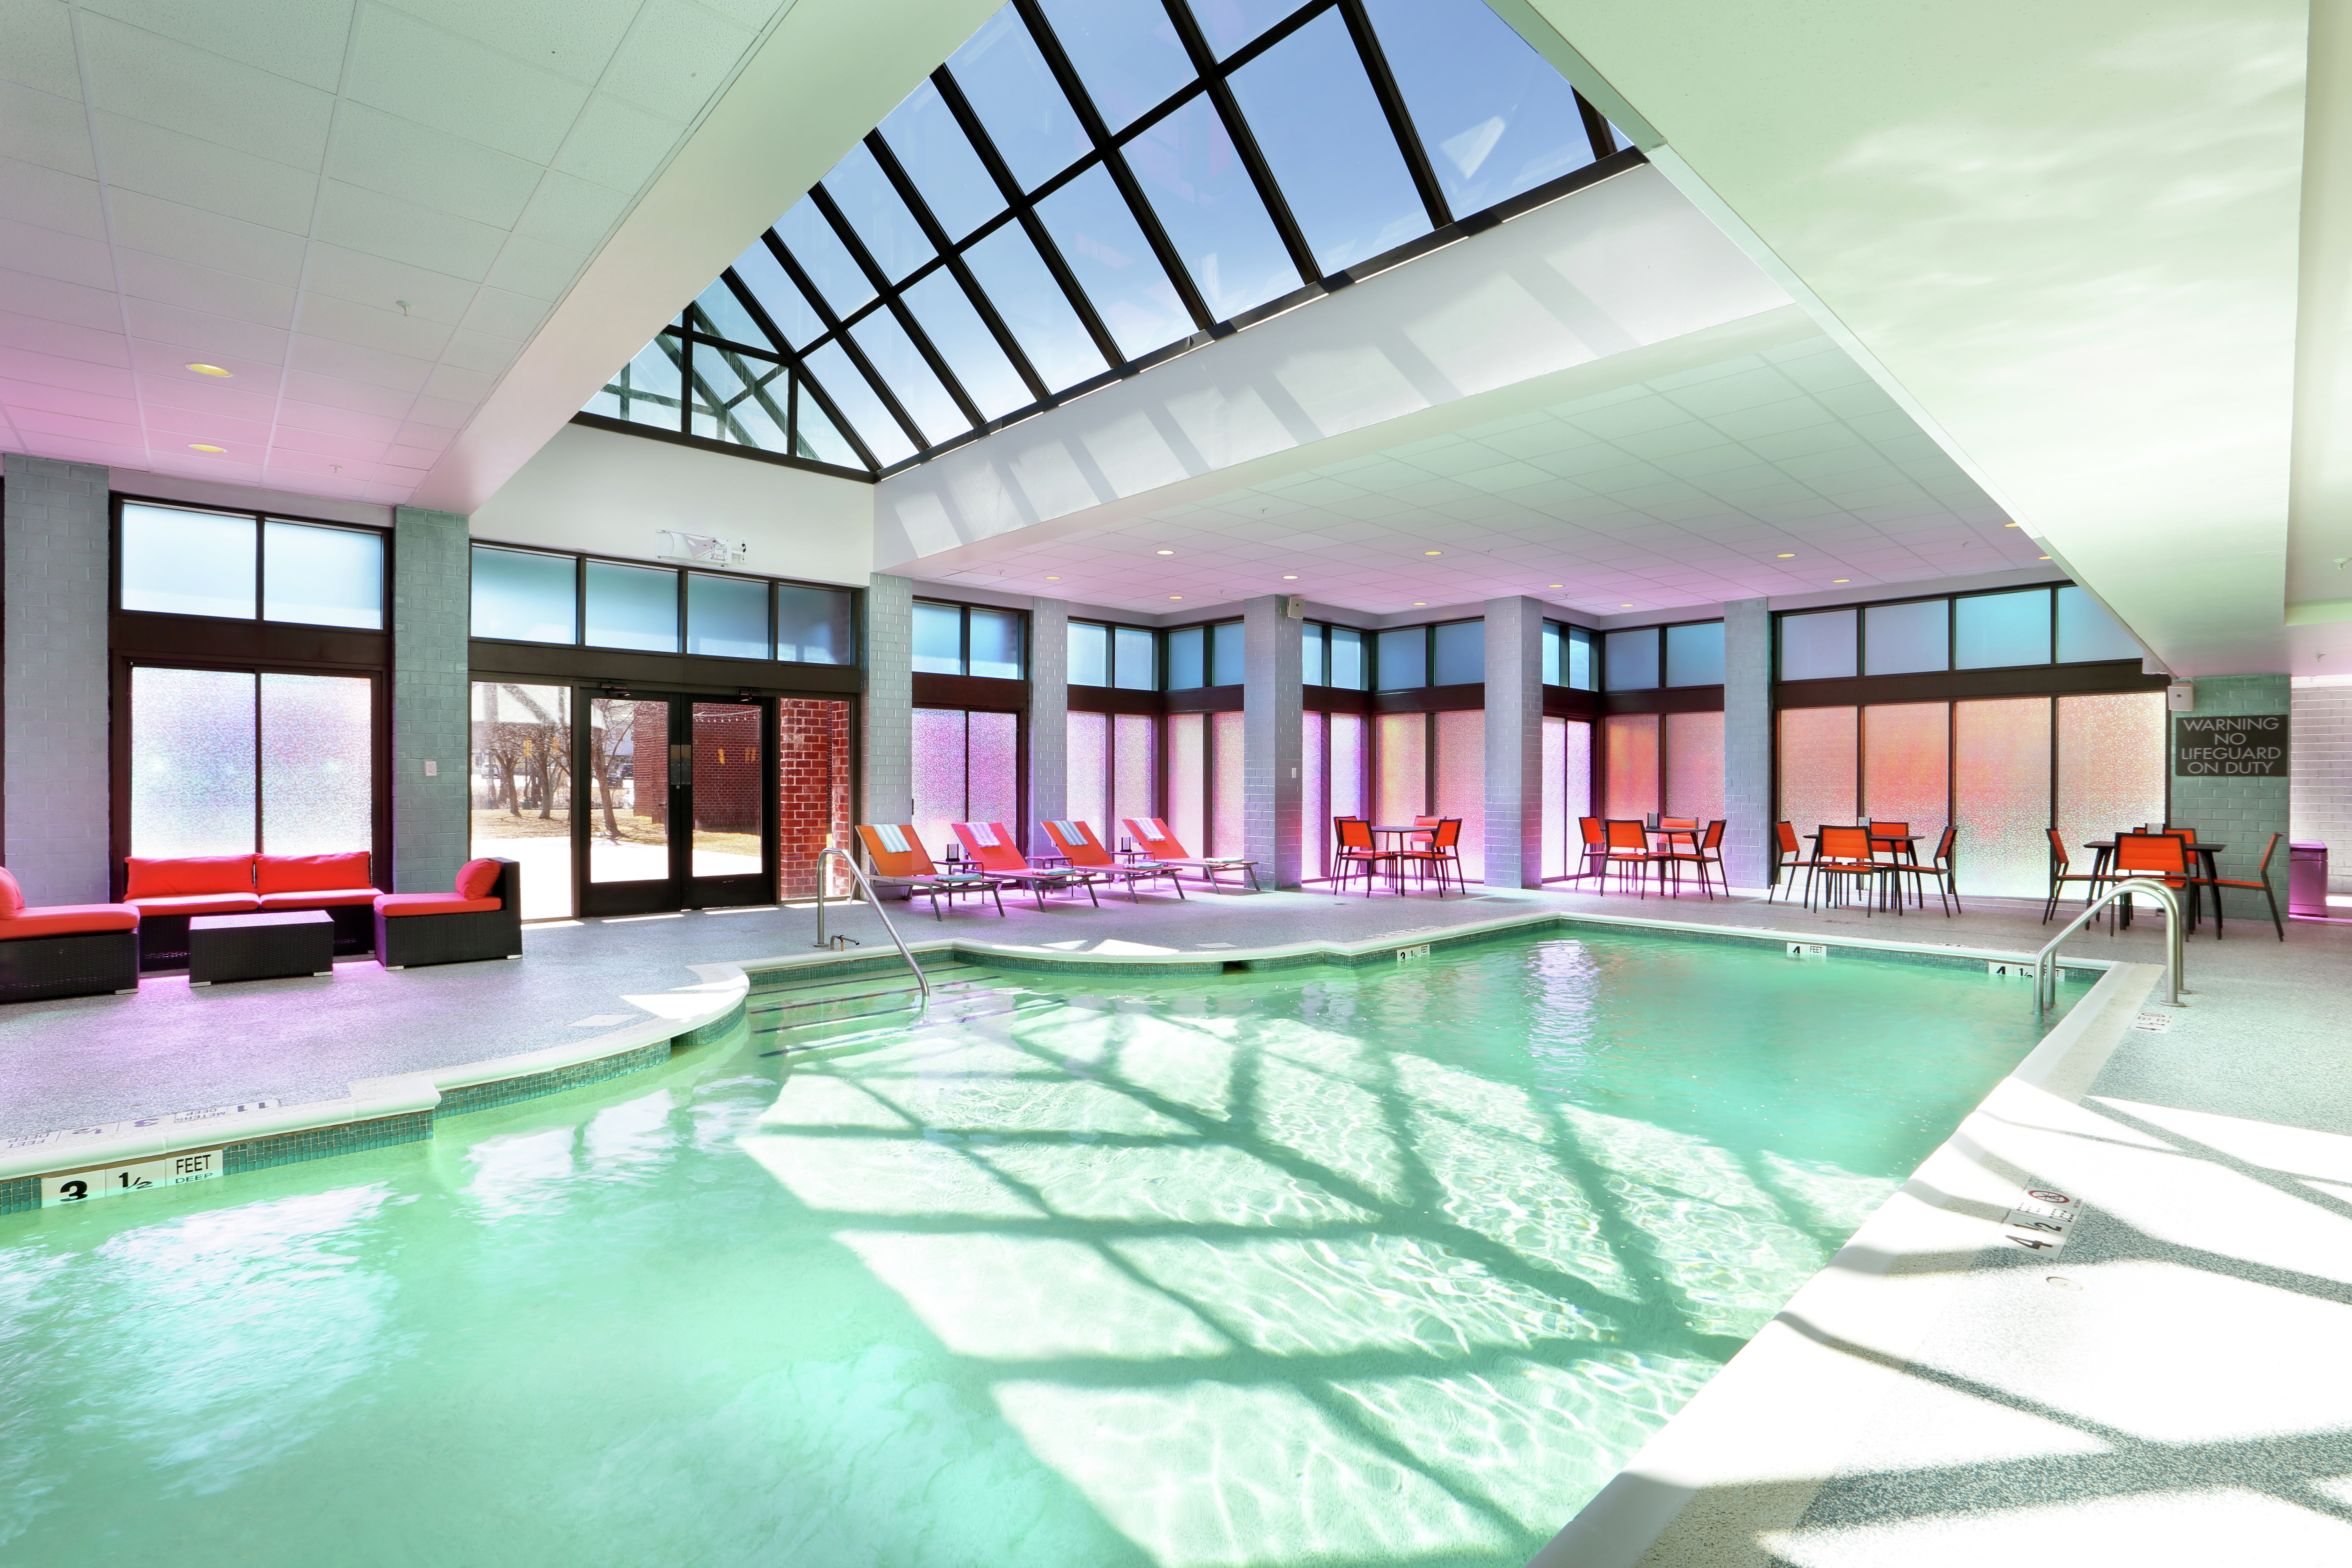 Indoor Pool Area with Seats and Large Windows